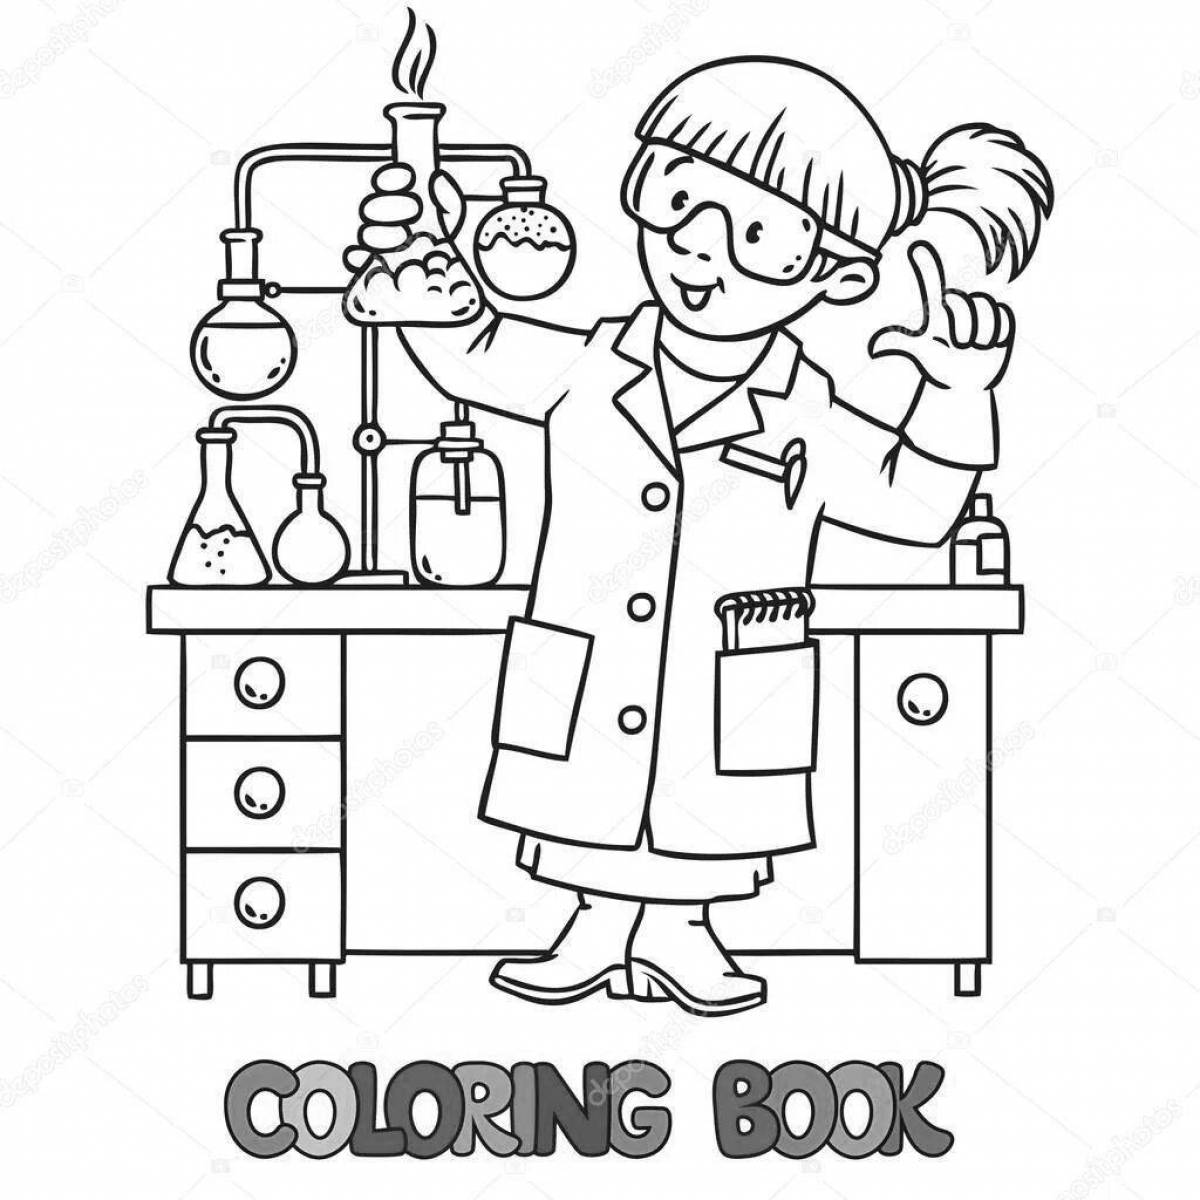 Pharmacist's bright coloring book